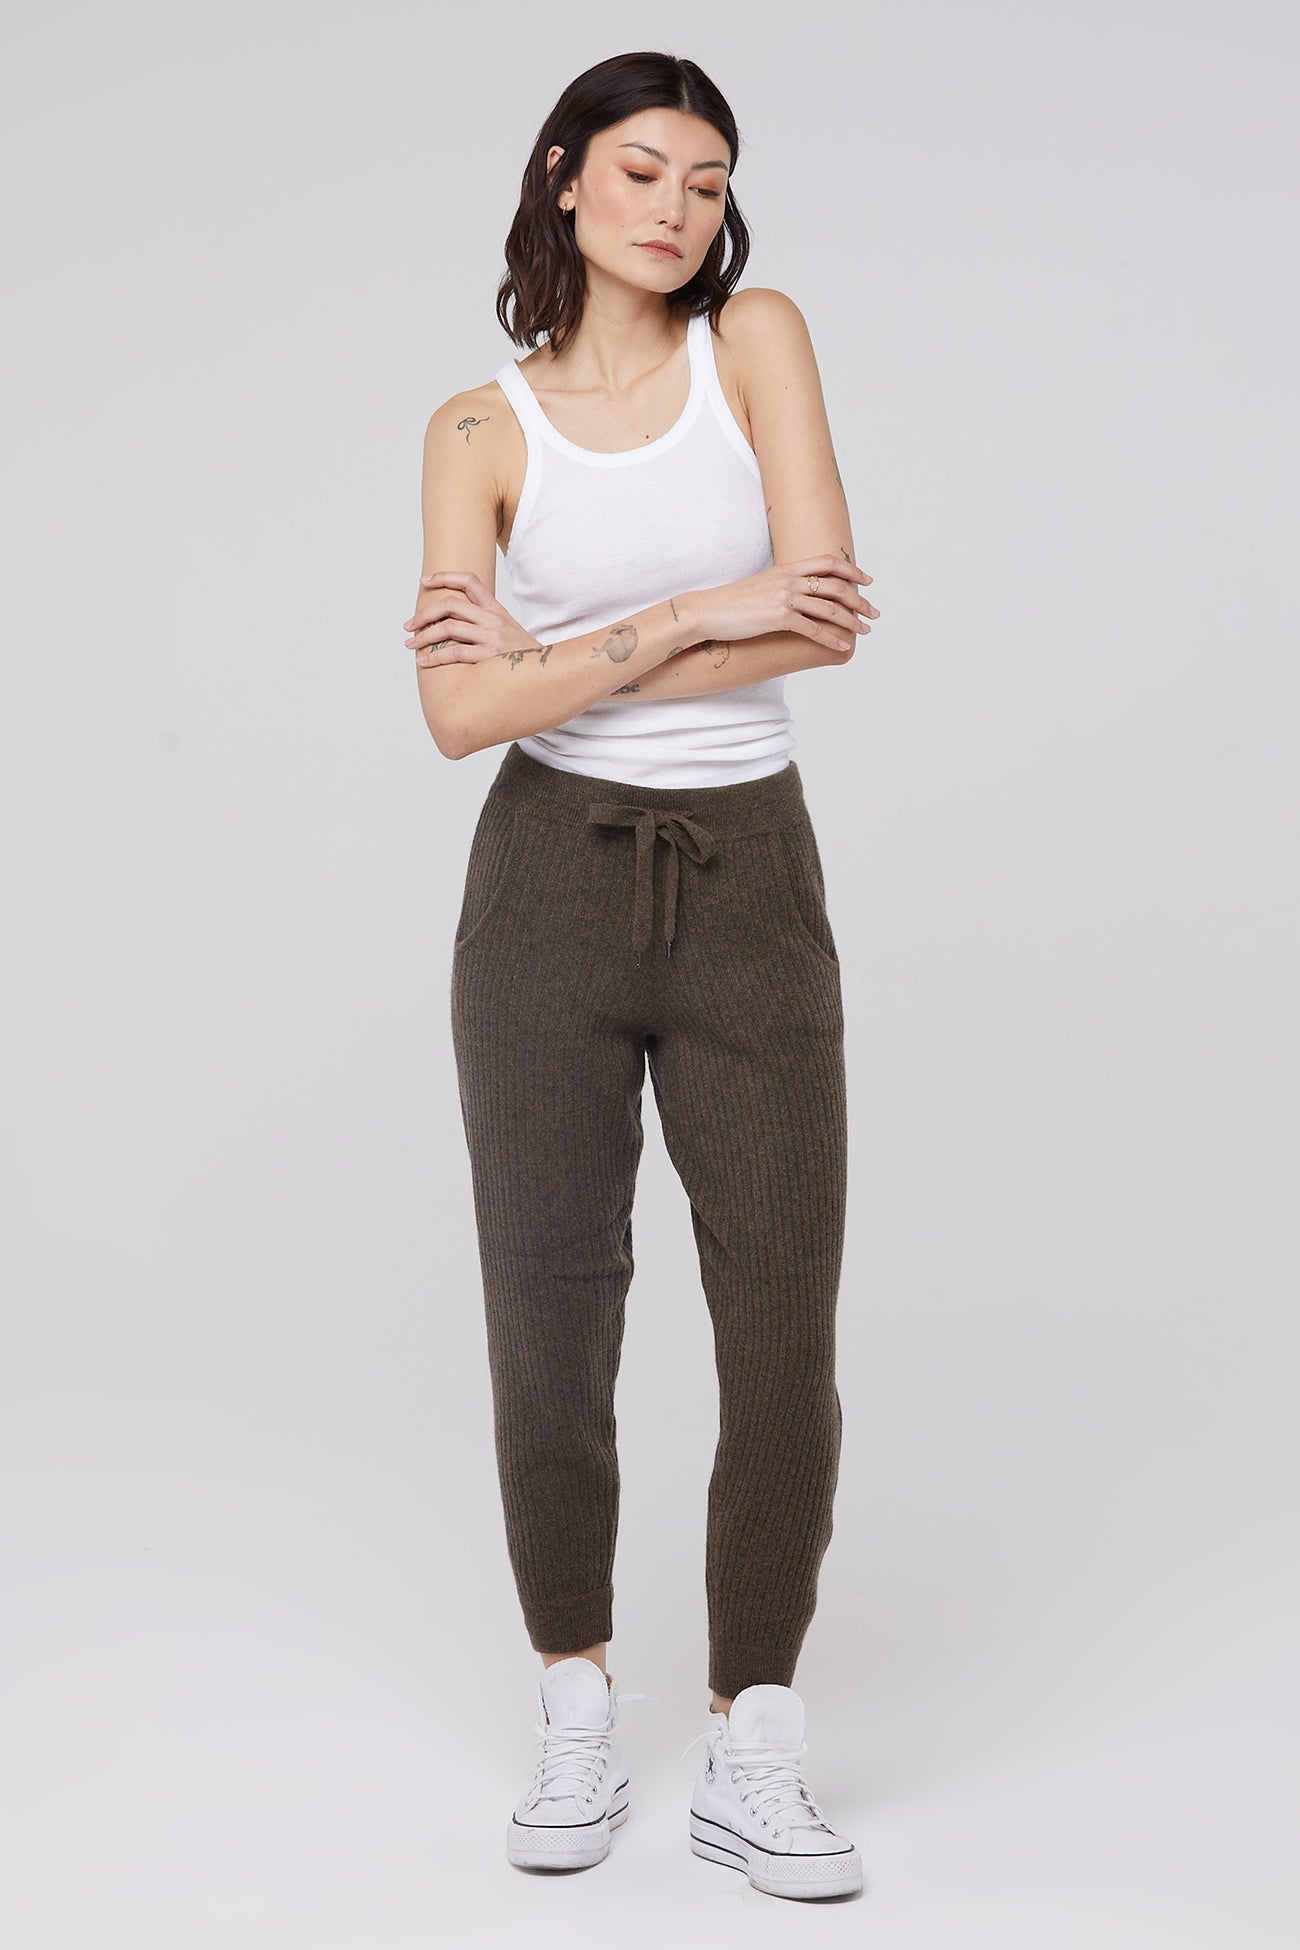 J.Crew Cotton-Cashmere Jogger Pants Womens Relaxed Fit Mid-Weight Sweatpants